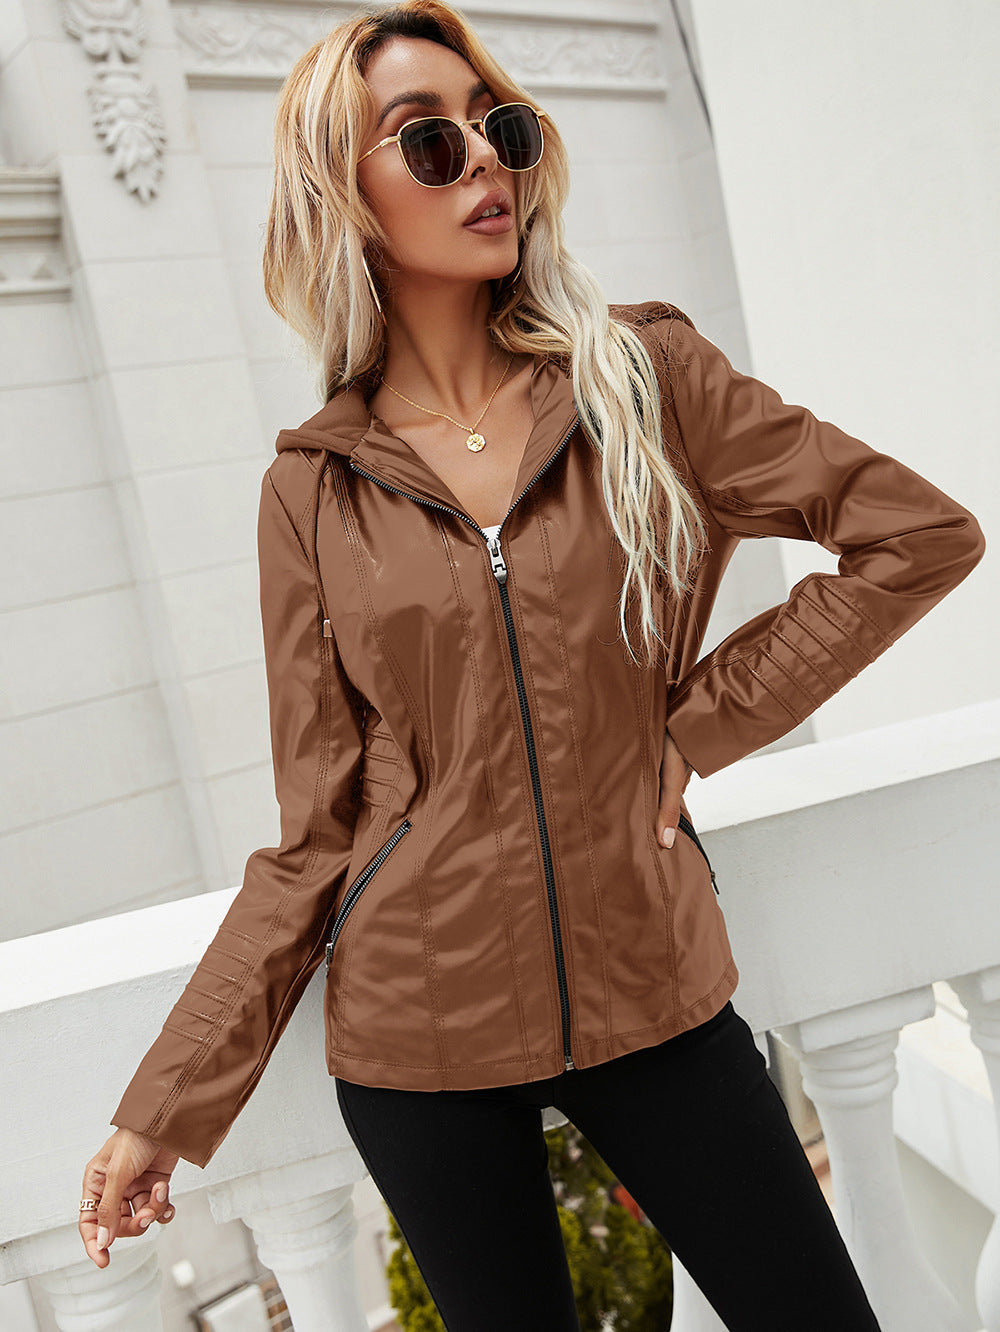 Hooded Long Sleeve Zipper Solid Color Women Clothing Leather Jacket Coat